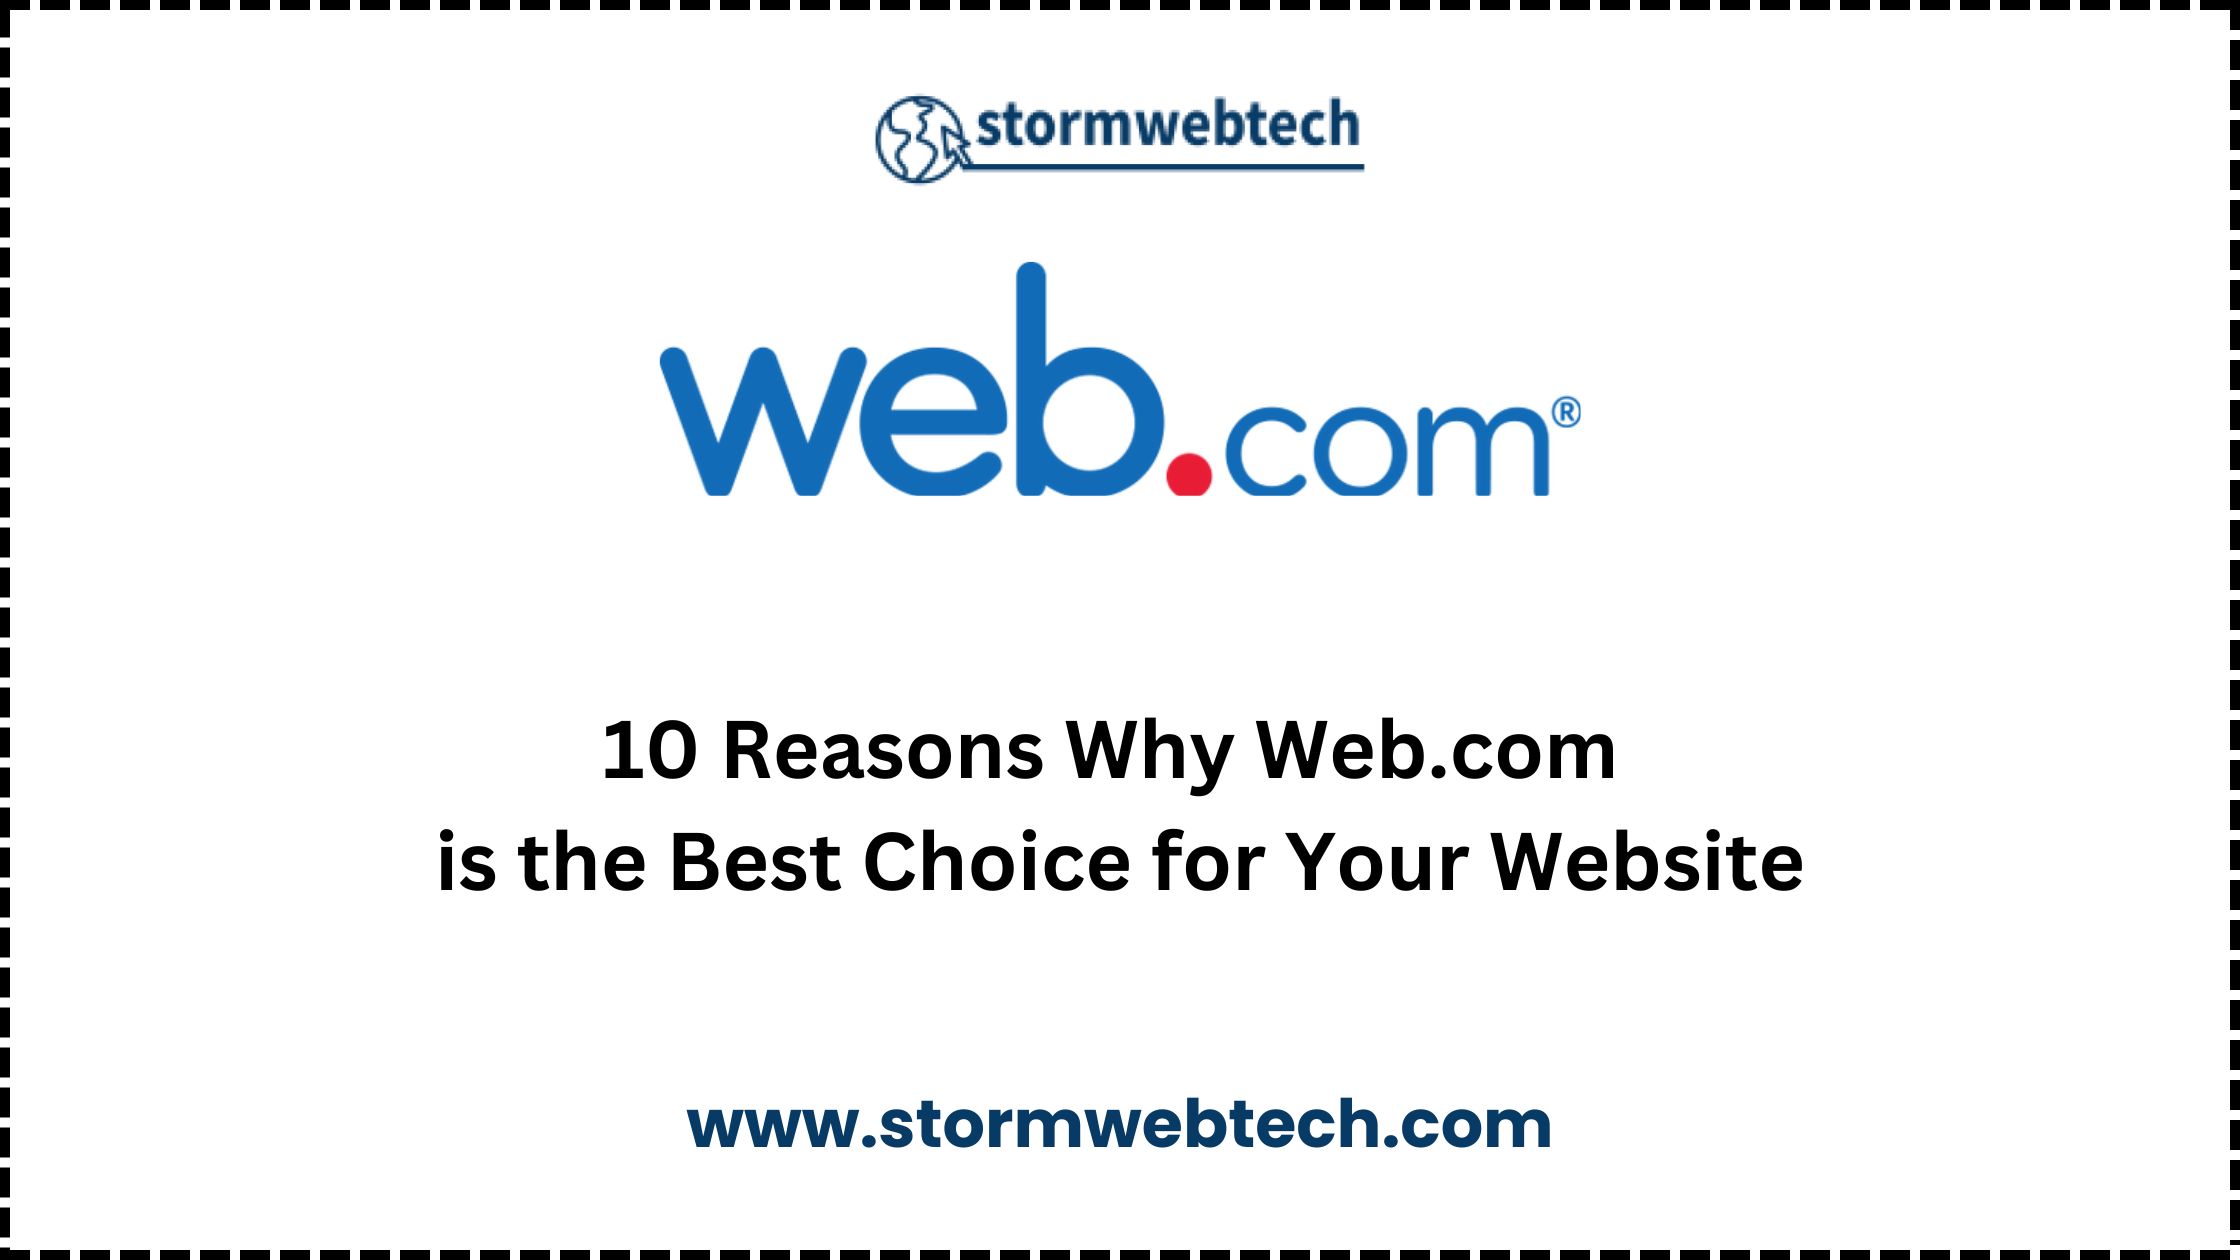 web.com is the best choice for your website needs because of their user-friendly website builder, seo, e-commerce solutions, reliable web hosting